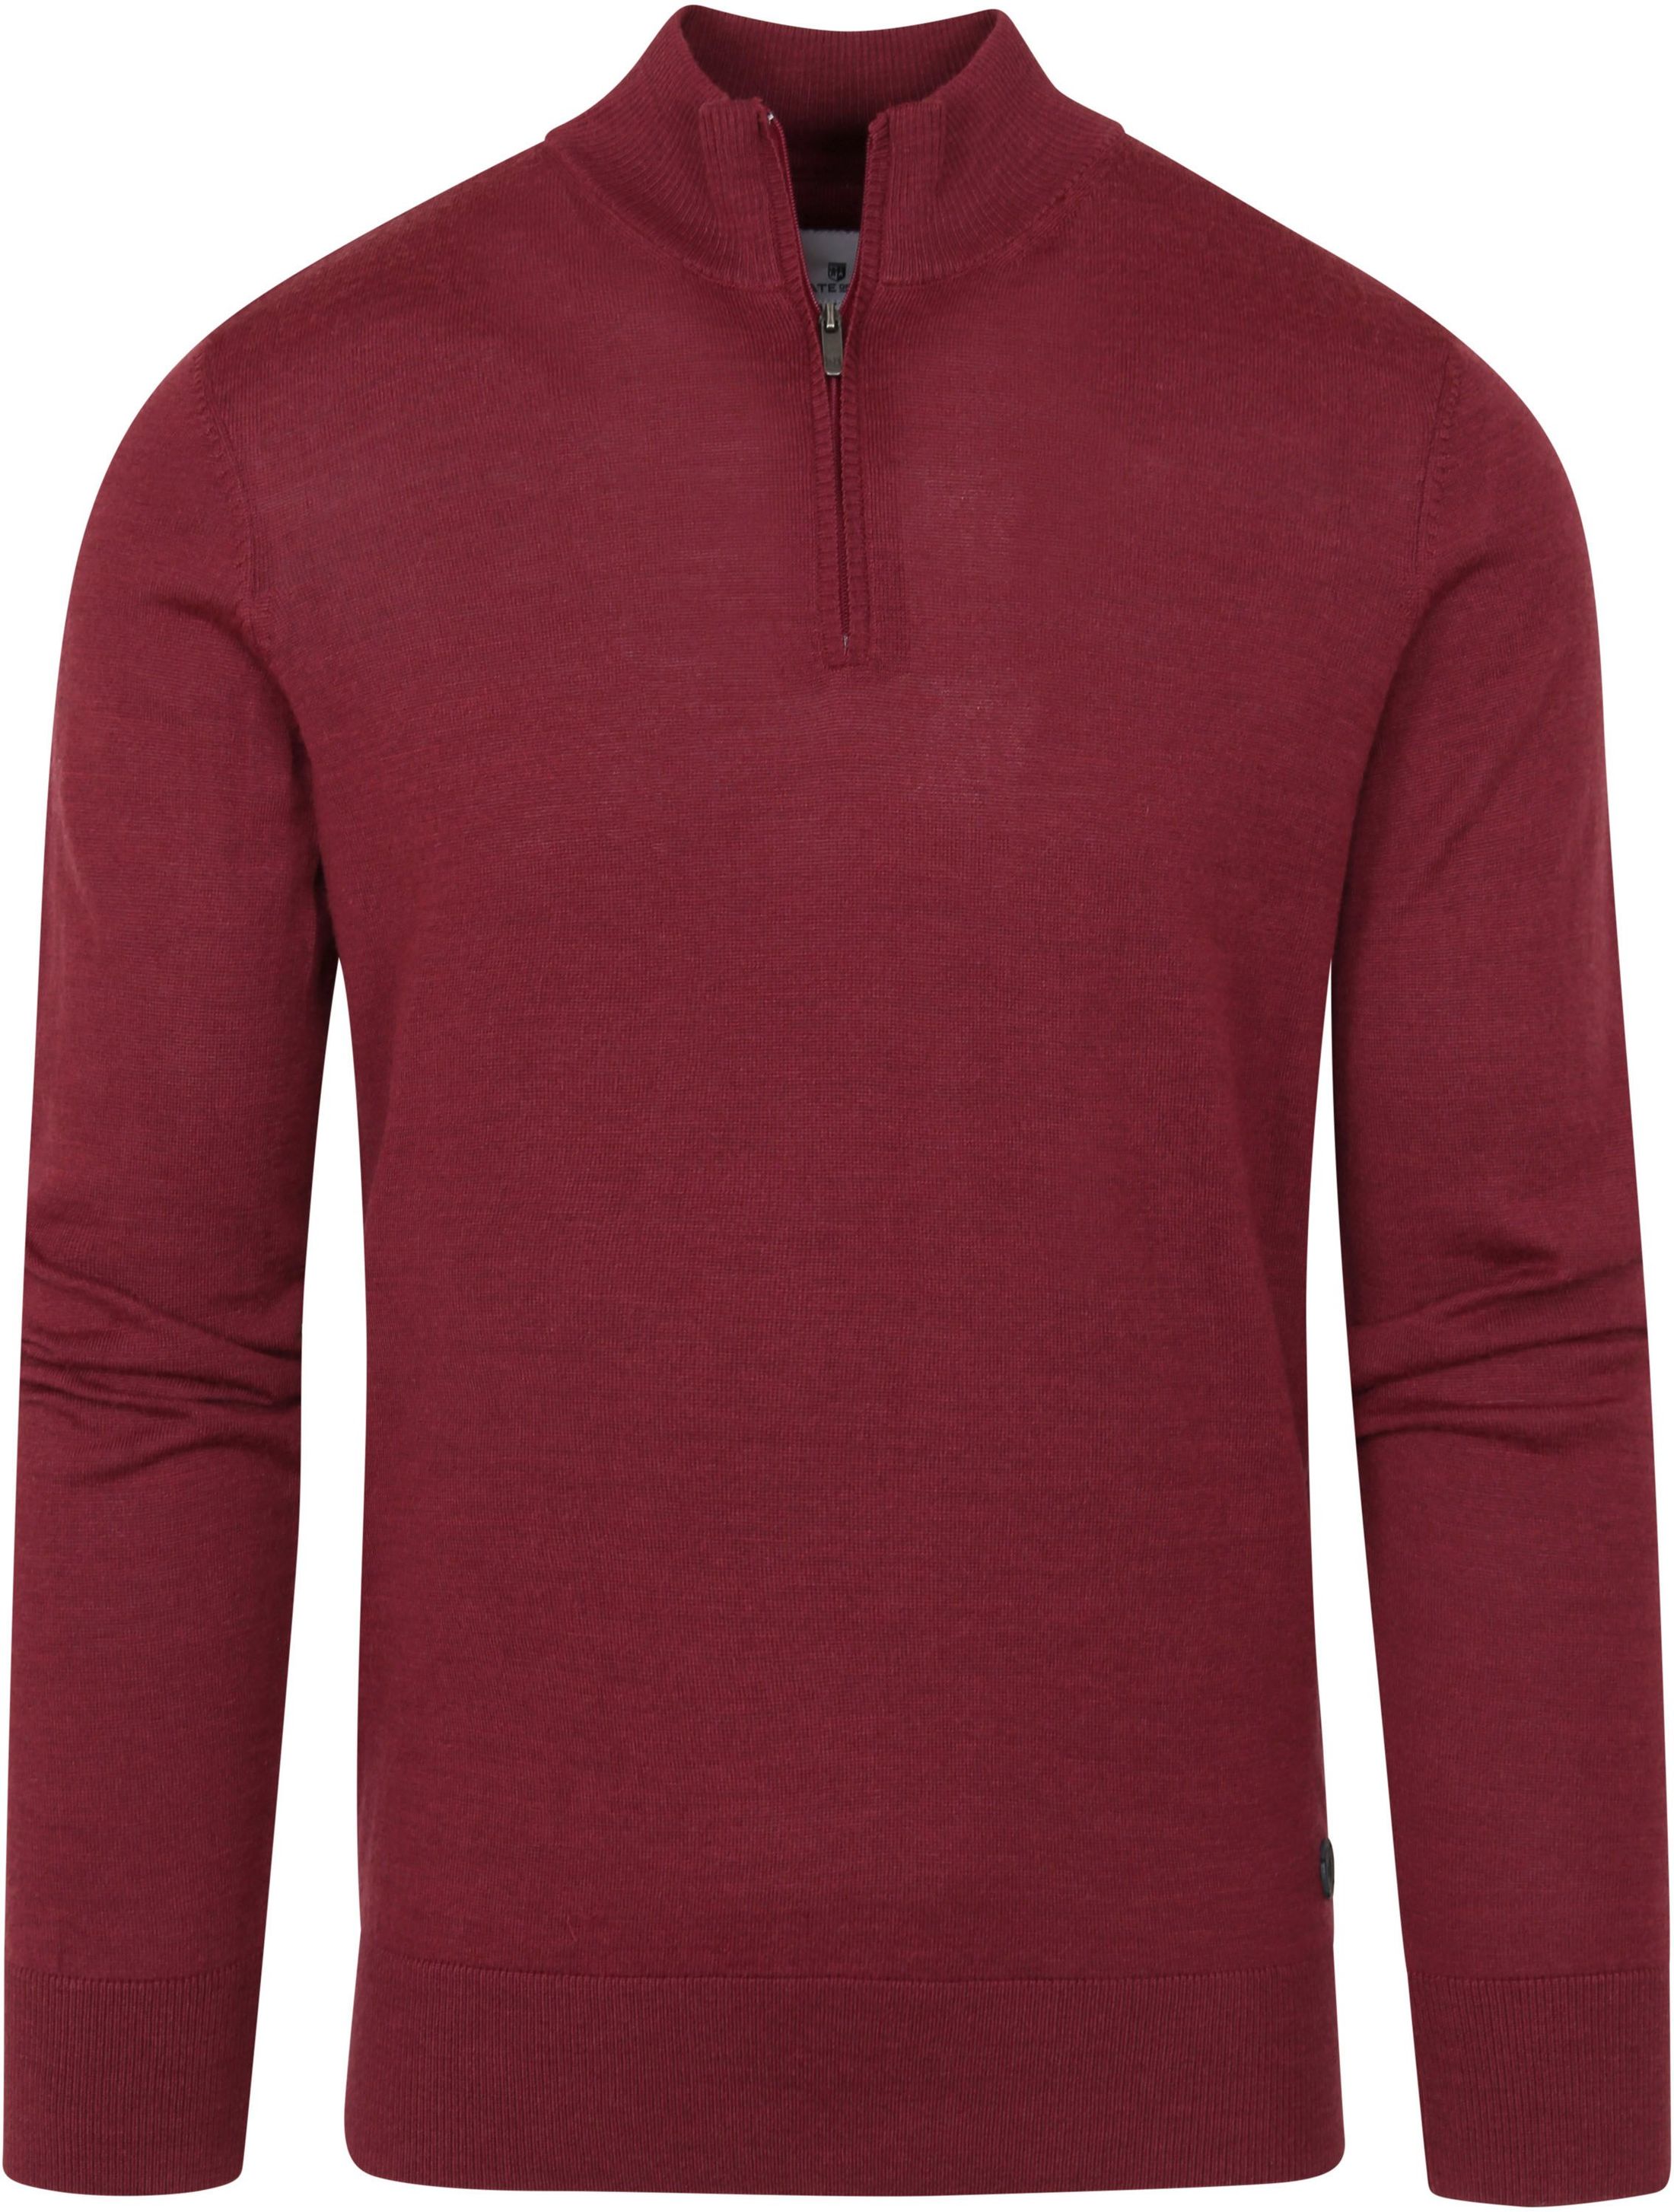 State Of Art Half Zip Wool Mix Bordeaux Red Burgundy size 3XL